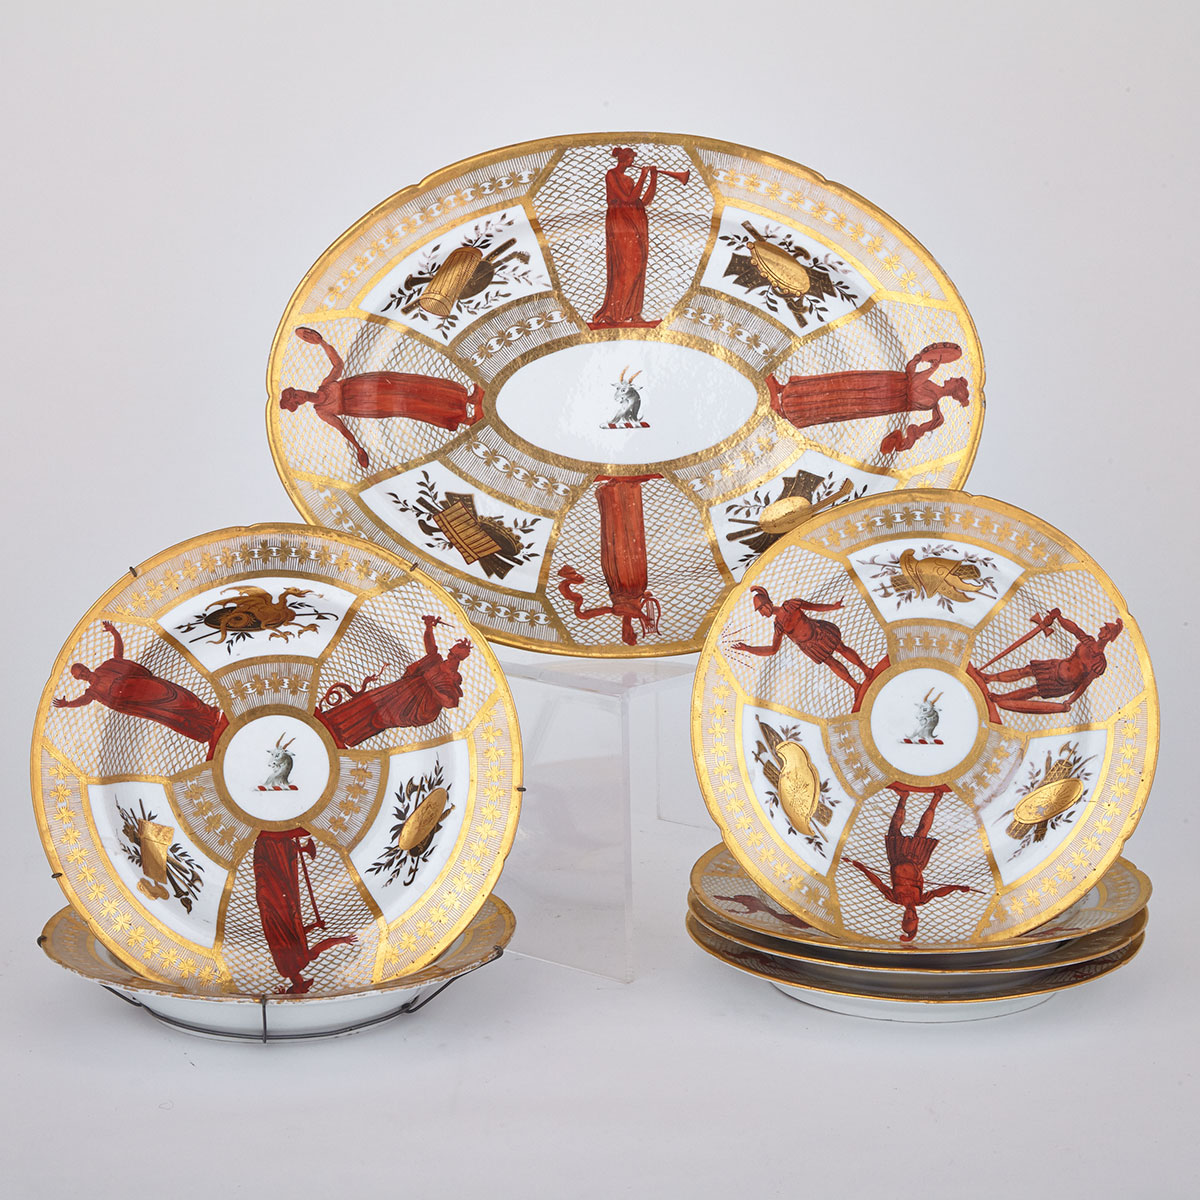 Four Coalport Armorial Plates, Two Soup Plates and a Platter, c.1805-10